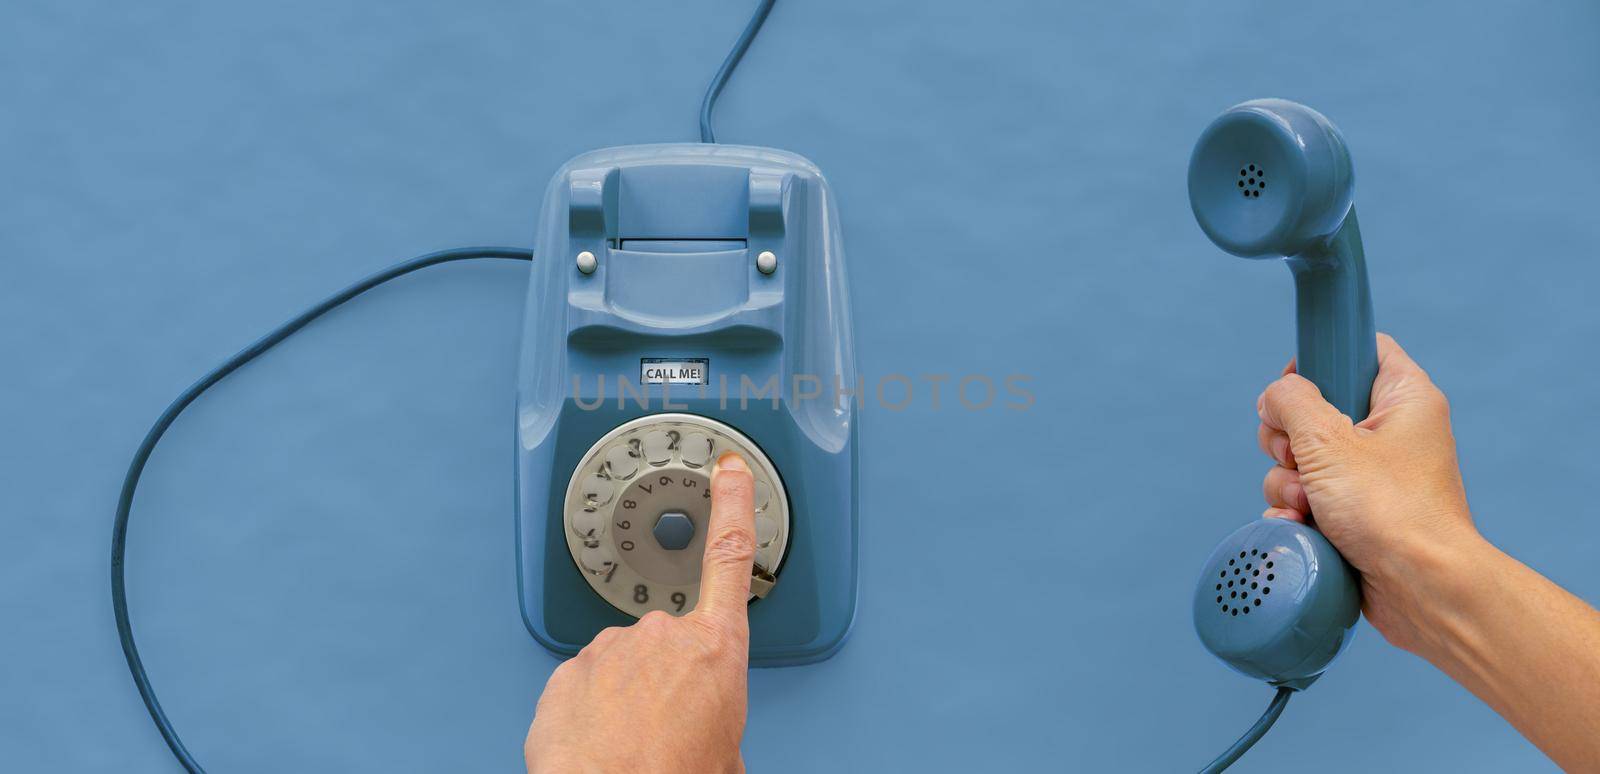 A blue vintage dial telephone handset with one hand and blue background. 